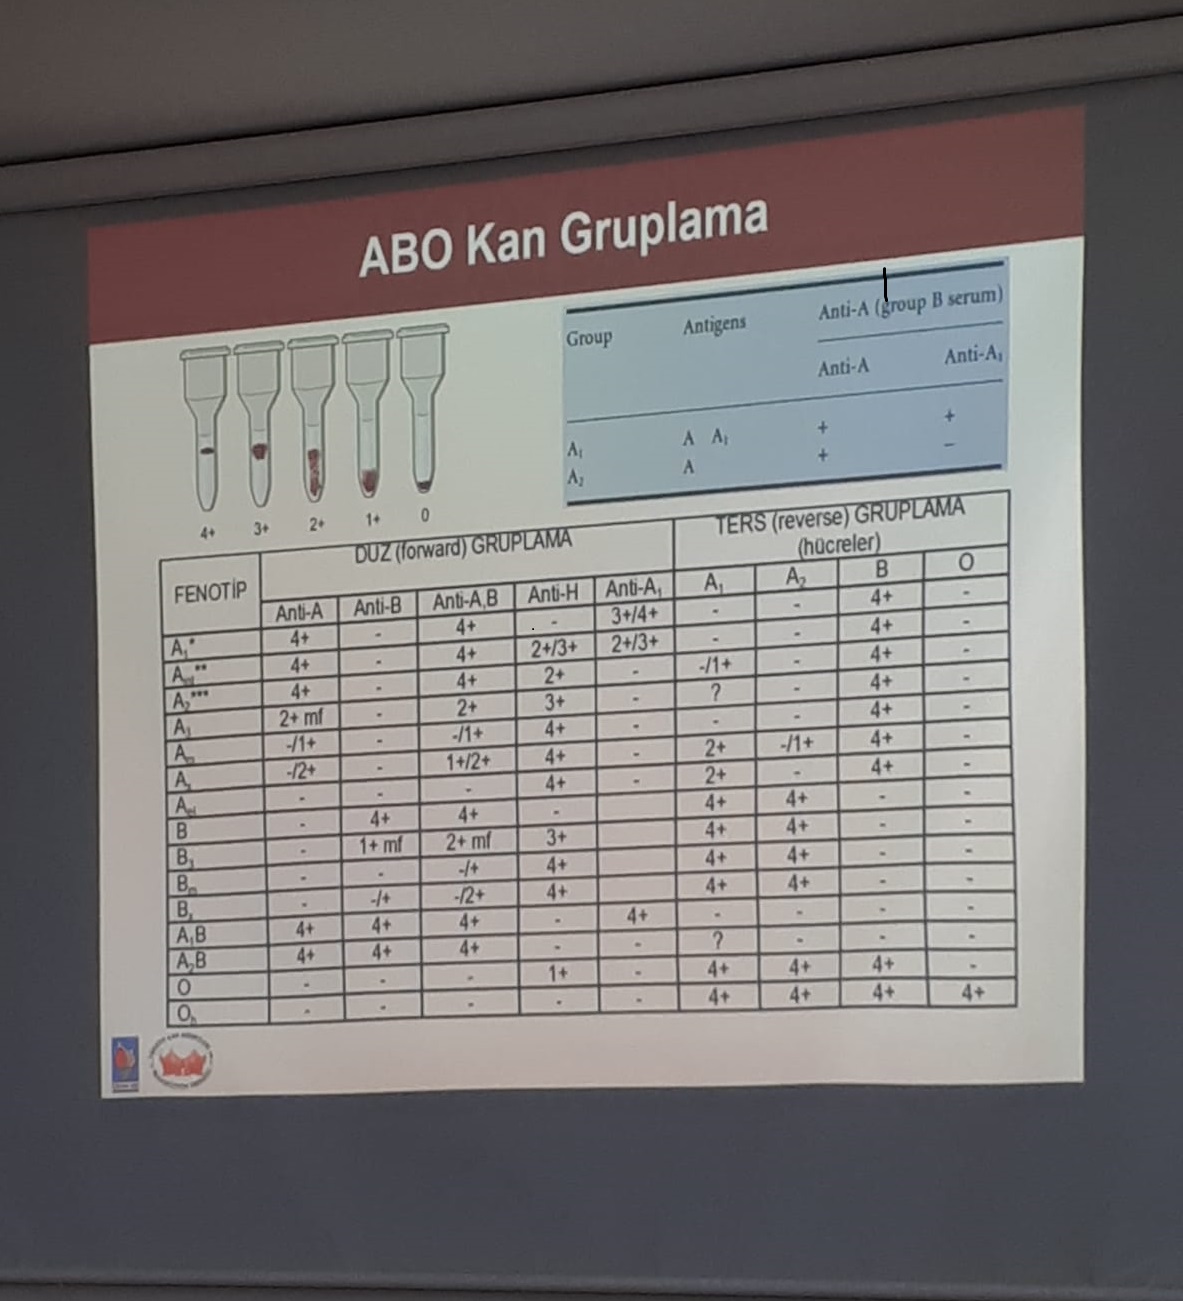 ABO Blood group system